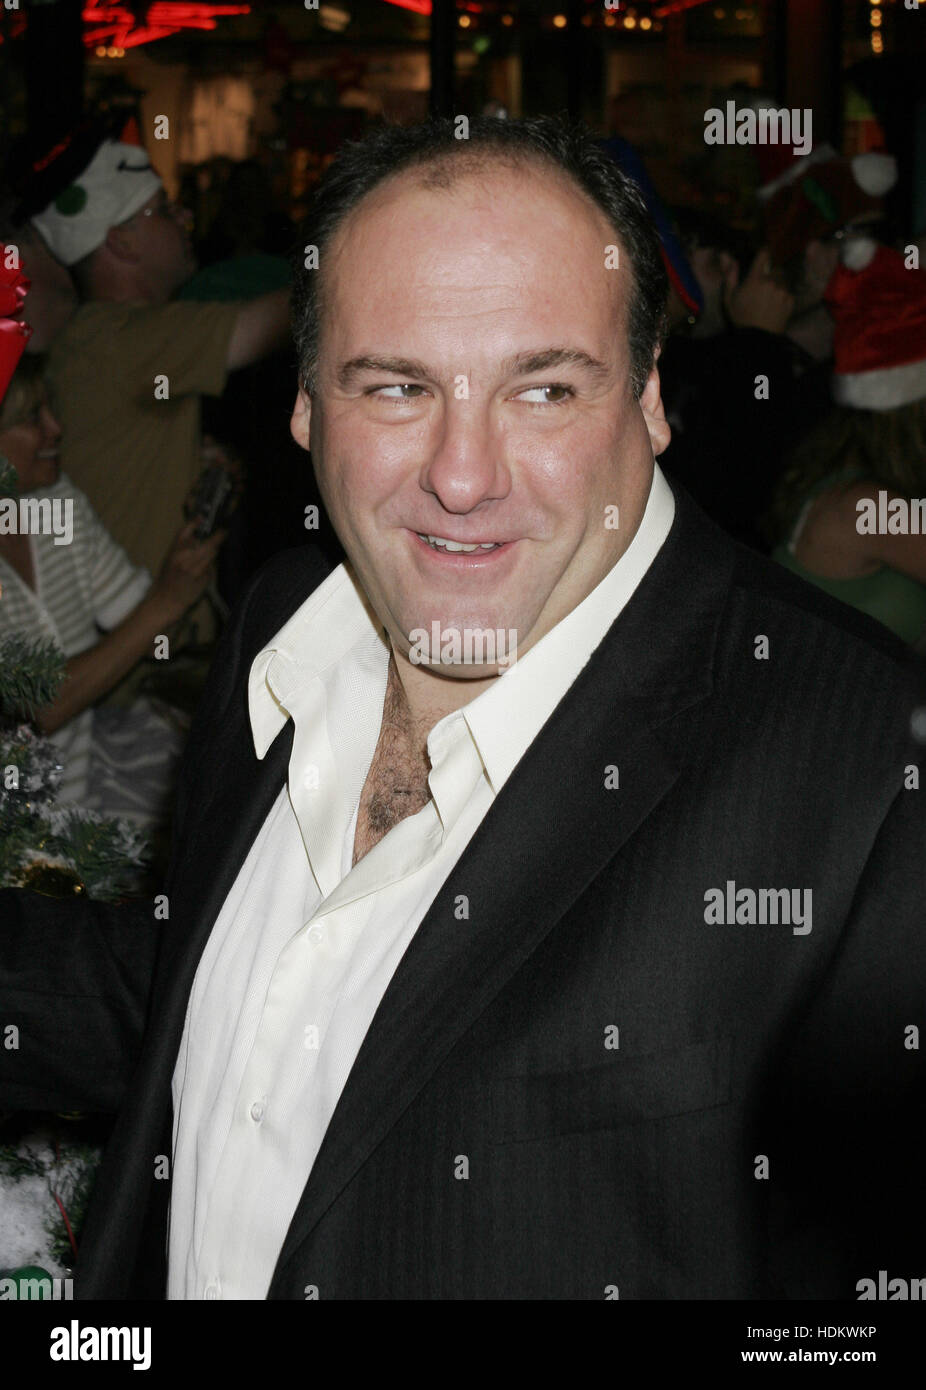 James Gandolfini at the premiere for 'Surviving Christmas' on October 143, 2004 in Los Angeles, California. Photo credit: Francis Specker Stock Photo